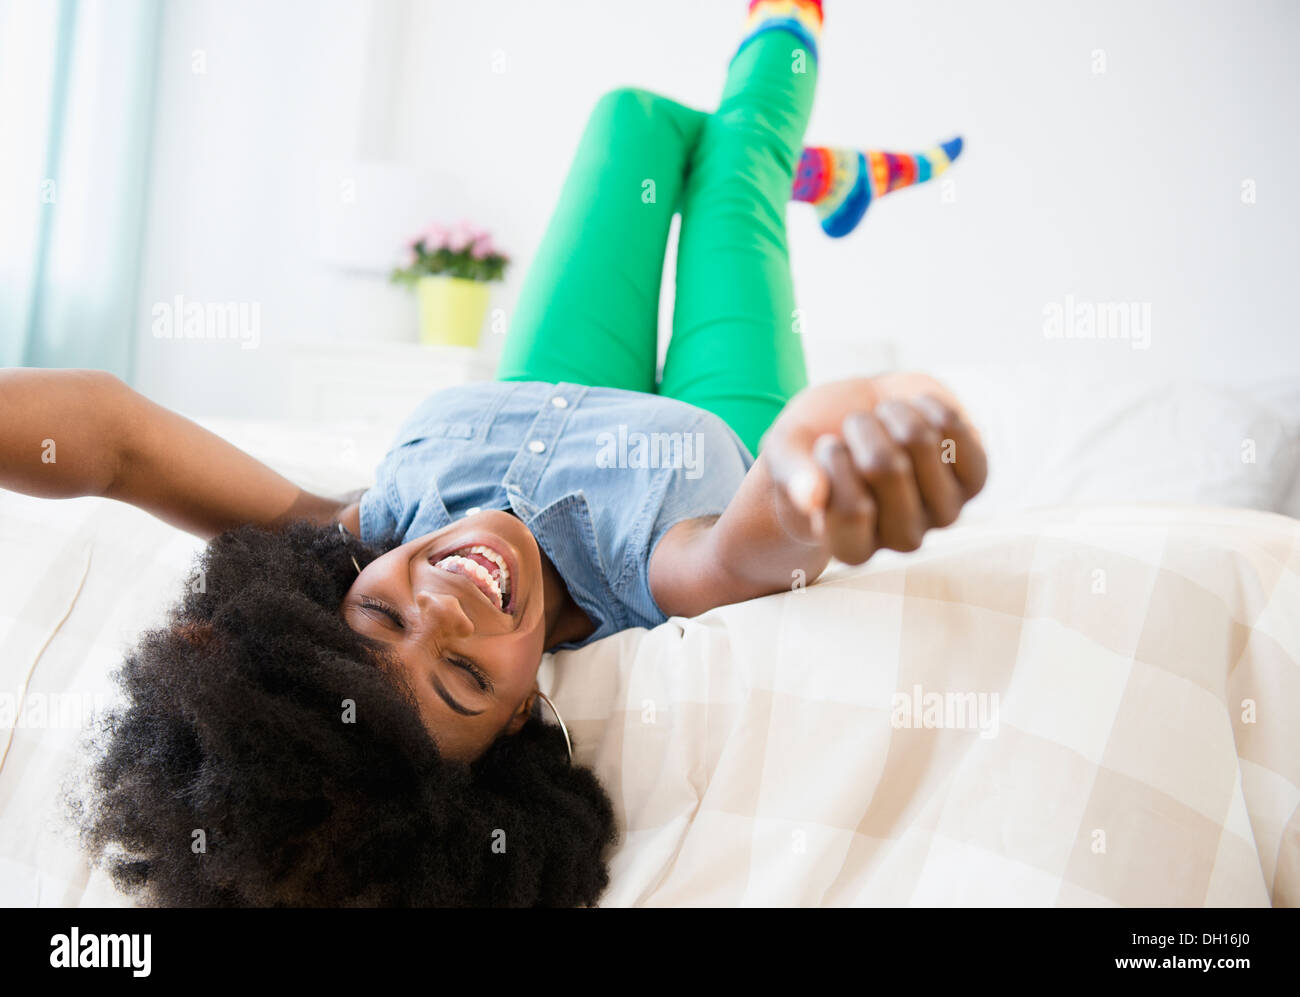 Mixed race woman smiling on bed Stock Photo